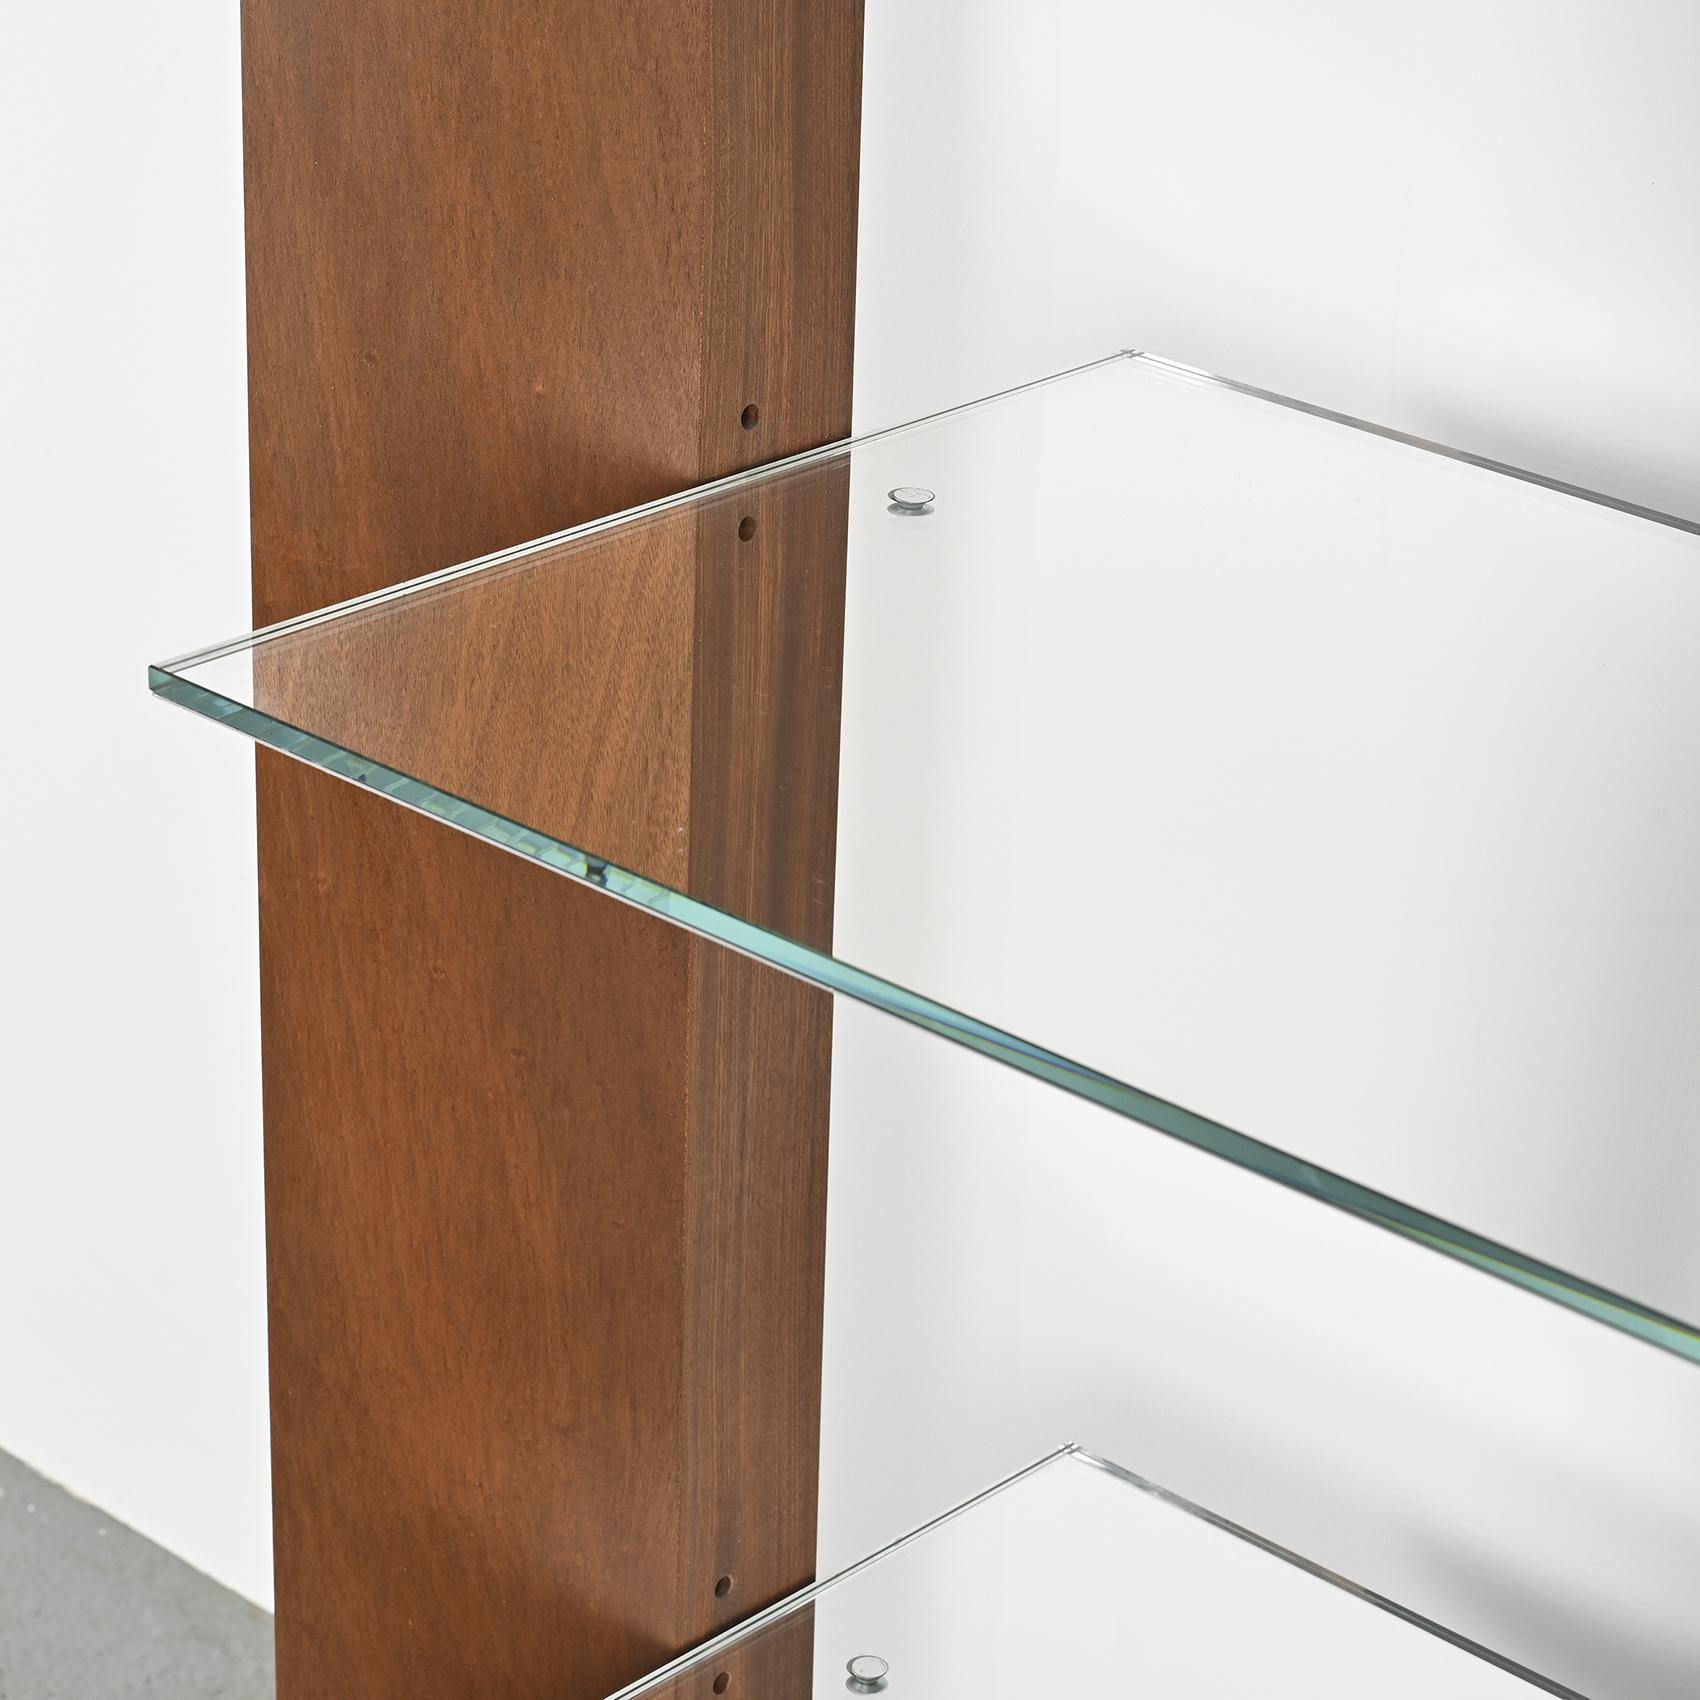 French A Pair of Modular Mirror-Bookshelves by Philippe Starck, Driade 2007